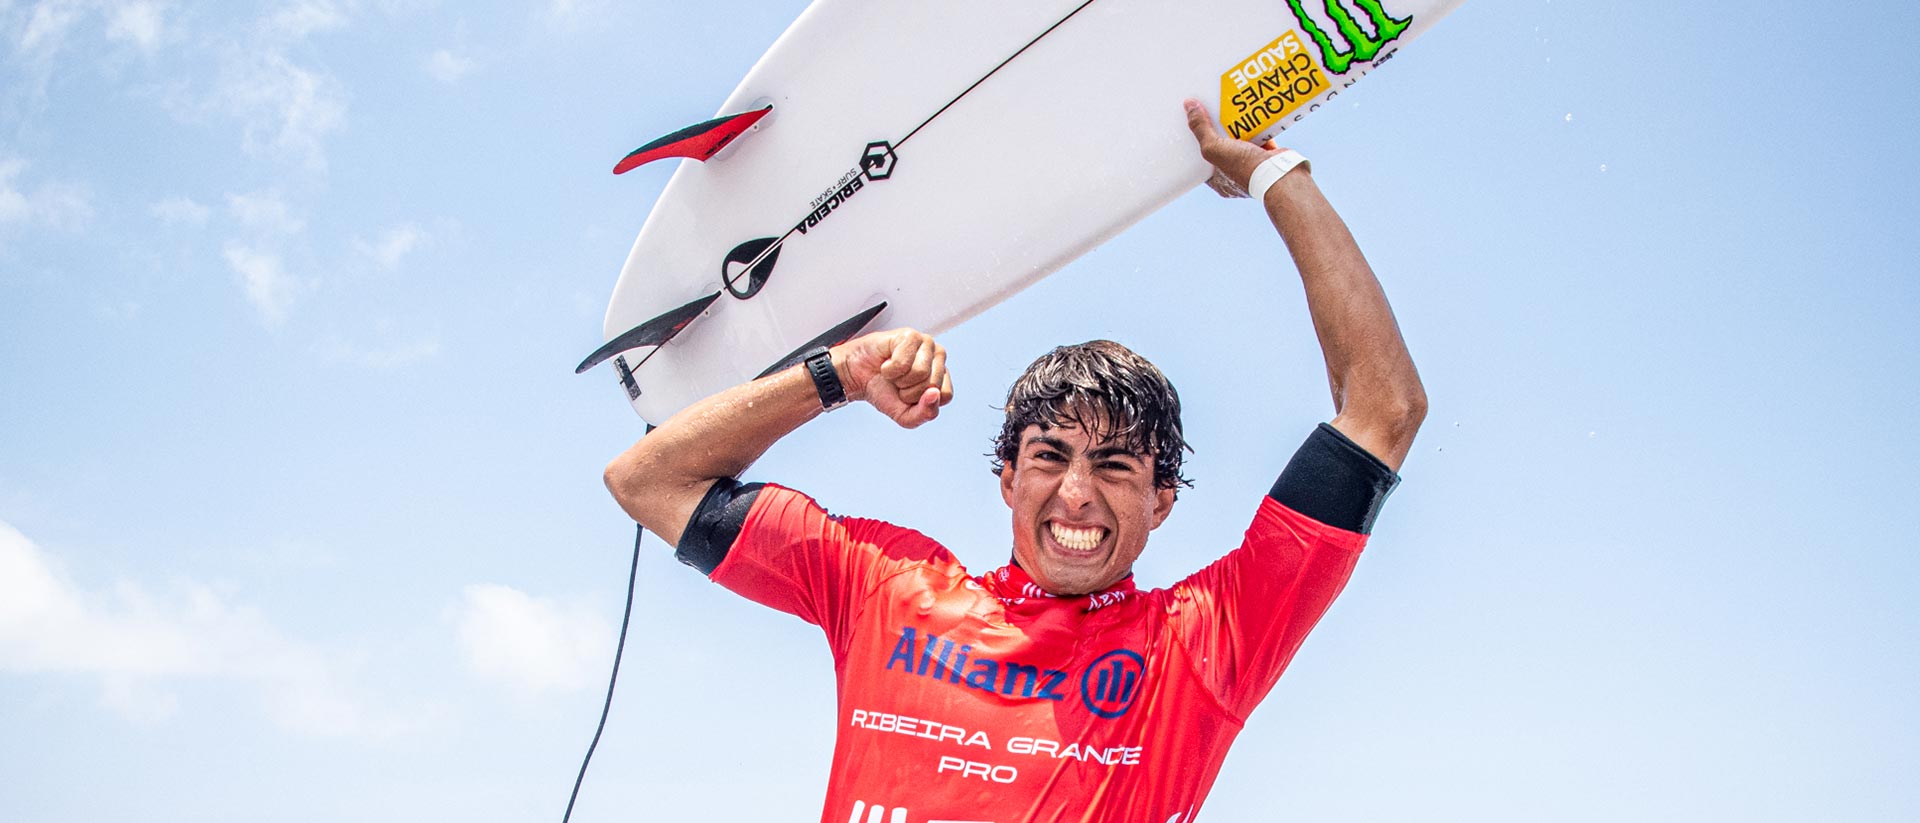 Joaquim Chaves celebrating with his board up